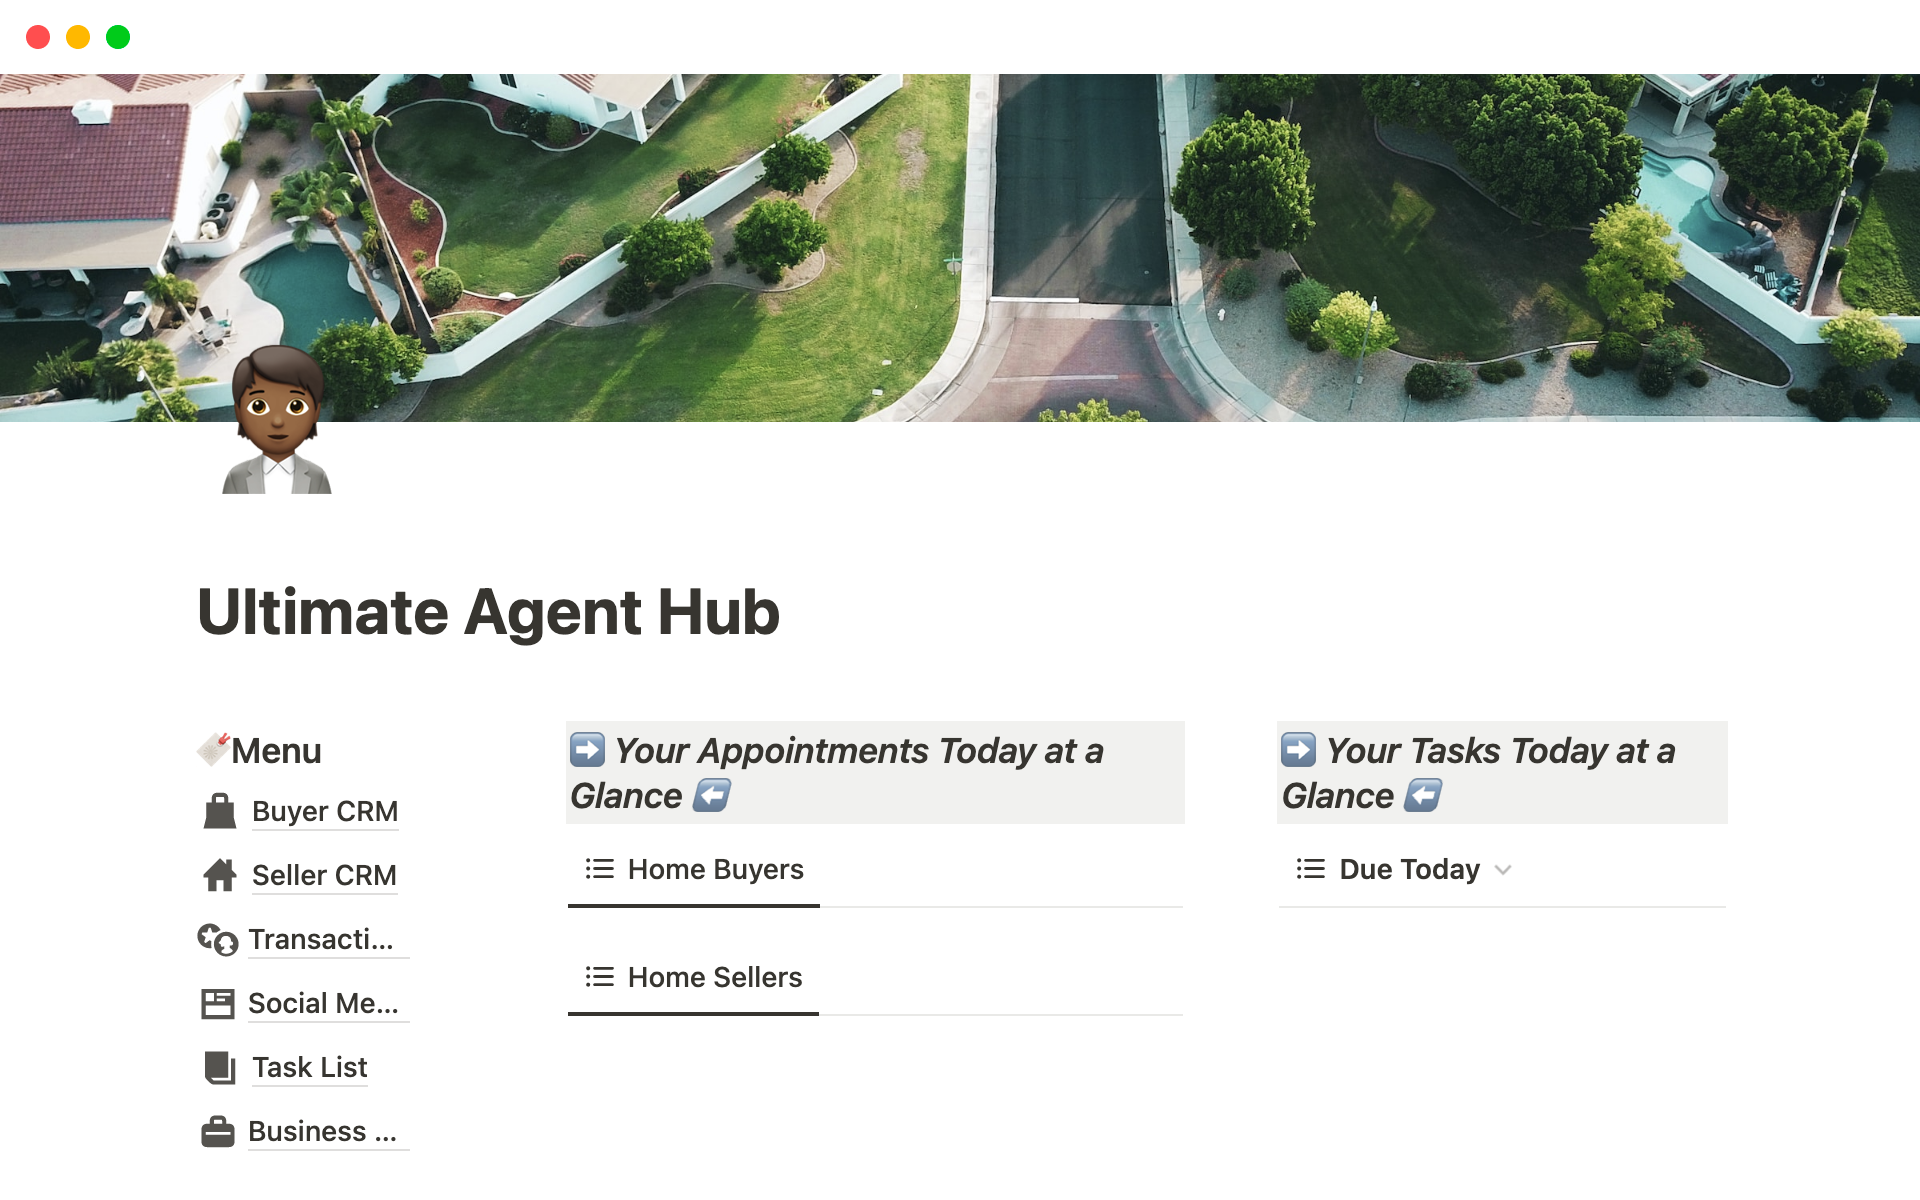 Helps real estate agents stay organized.